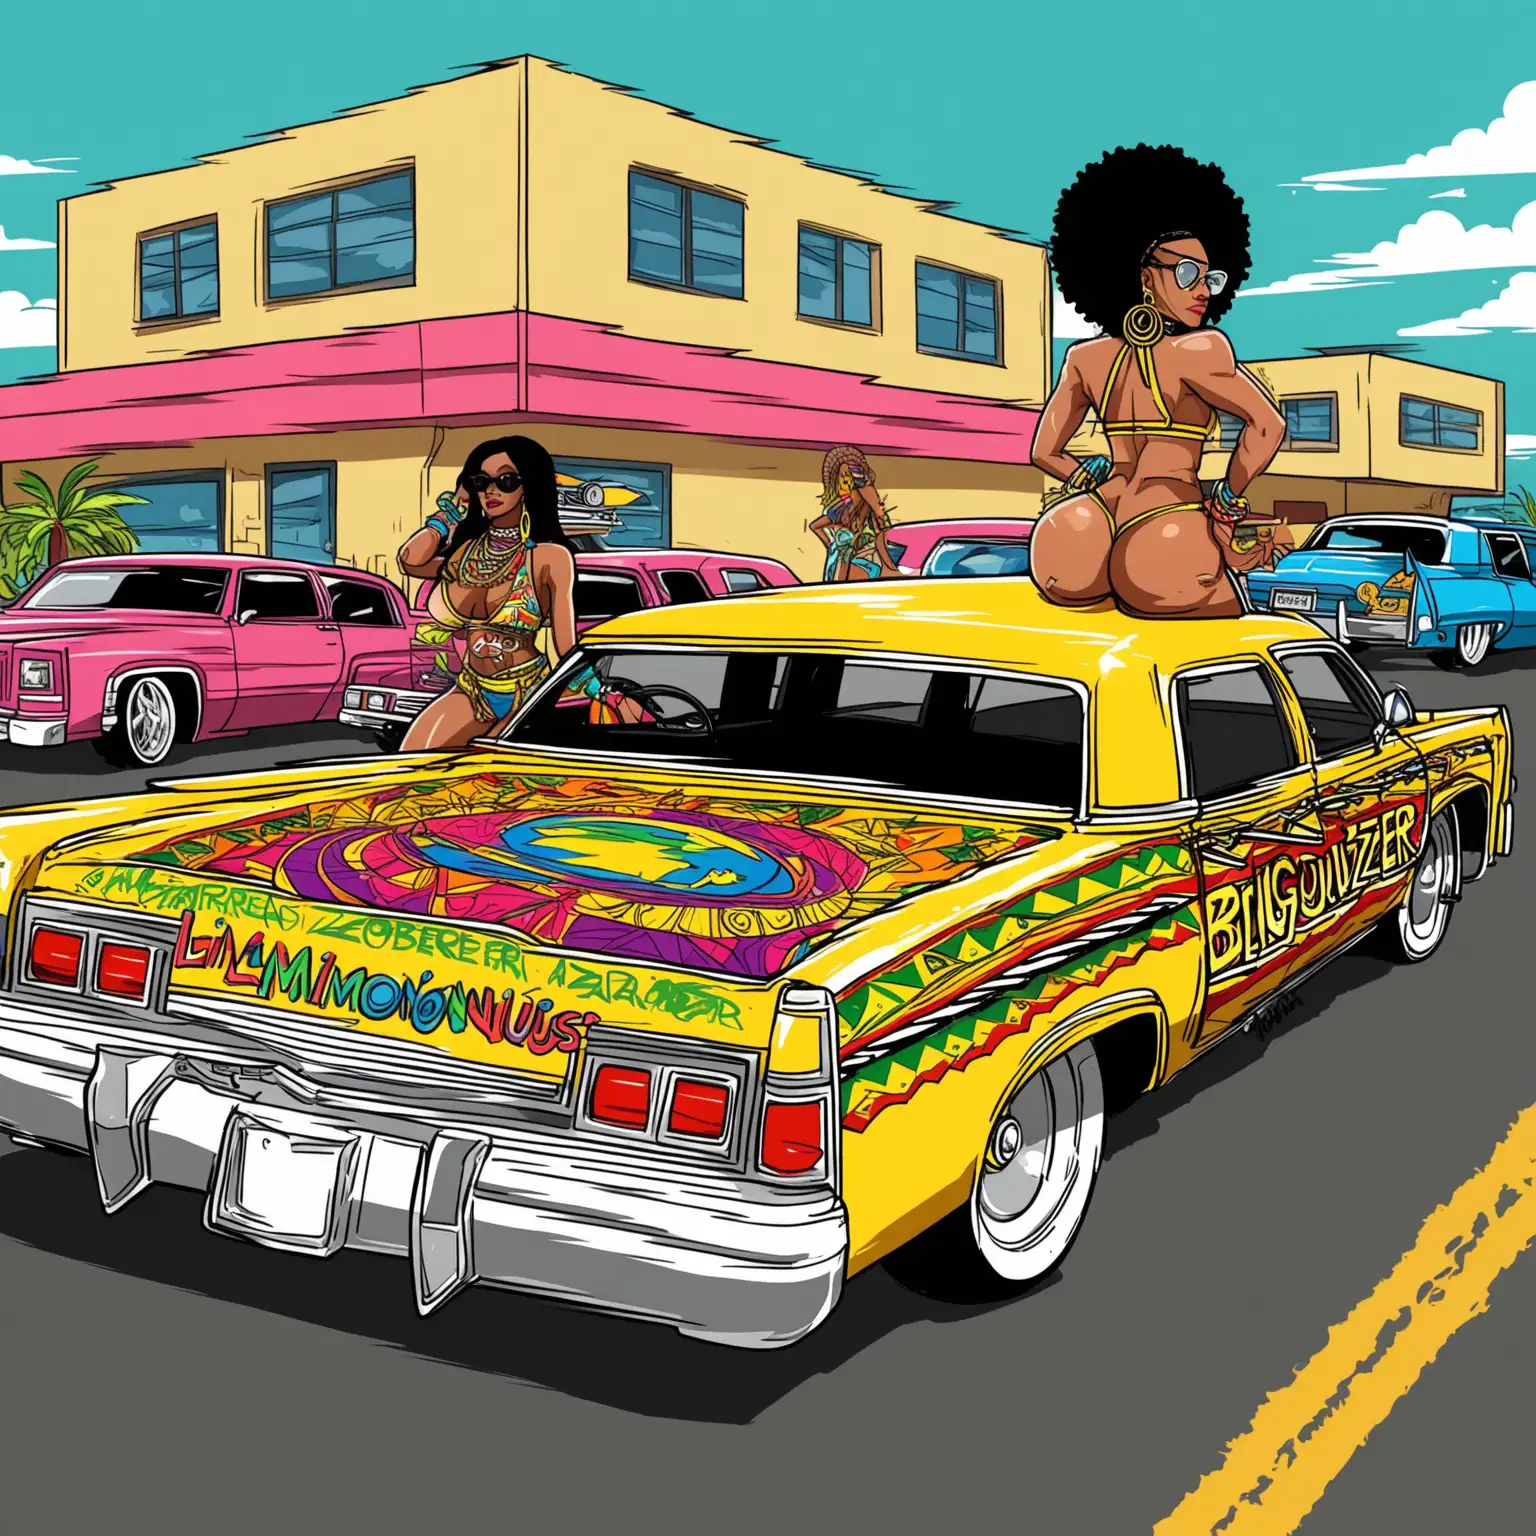 Colorful Jamaican Illustration with African American Figure and Lowrider Car